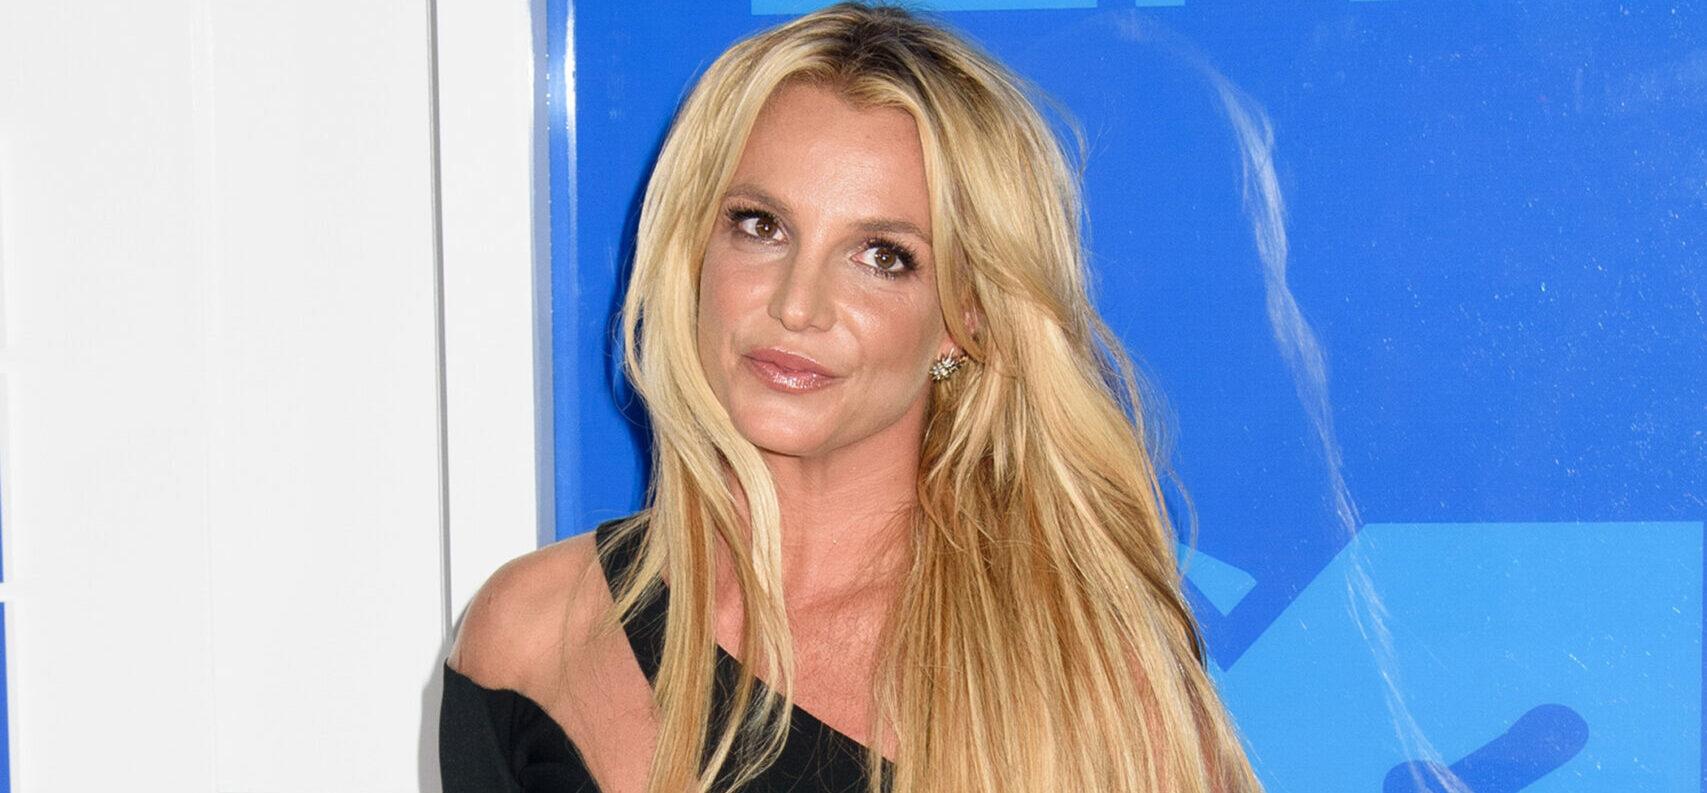 Britney Spears SHOCKS Fans Posting Full-Frontal Nude Pictures On Instagram